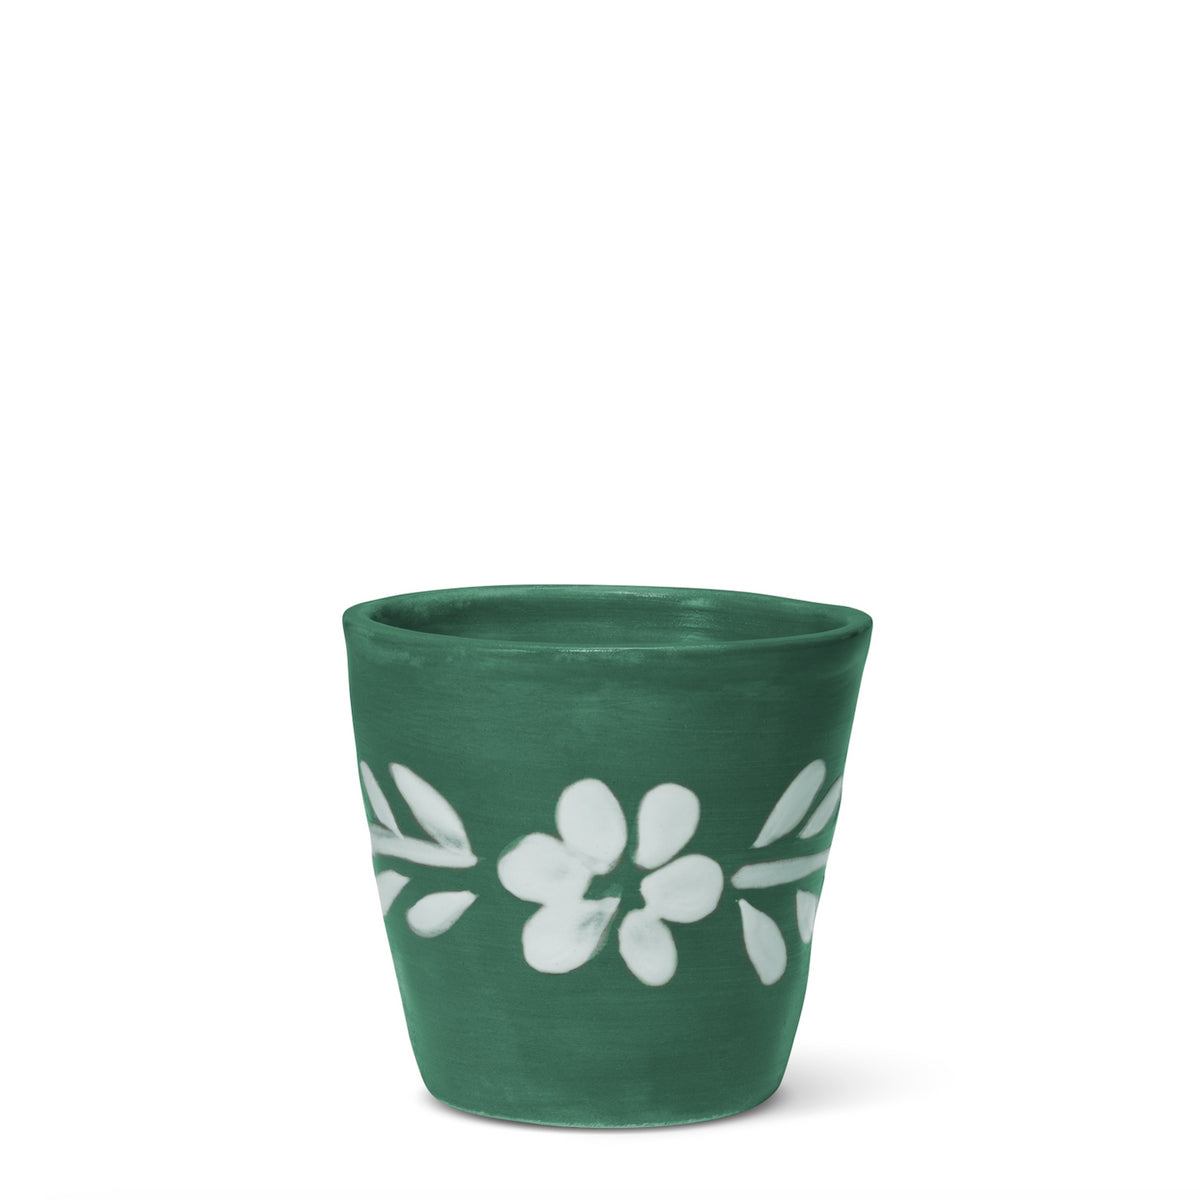 Espresso Cup With White Floral Trim in Cypress